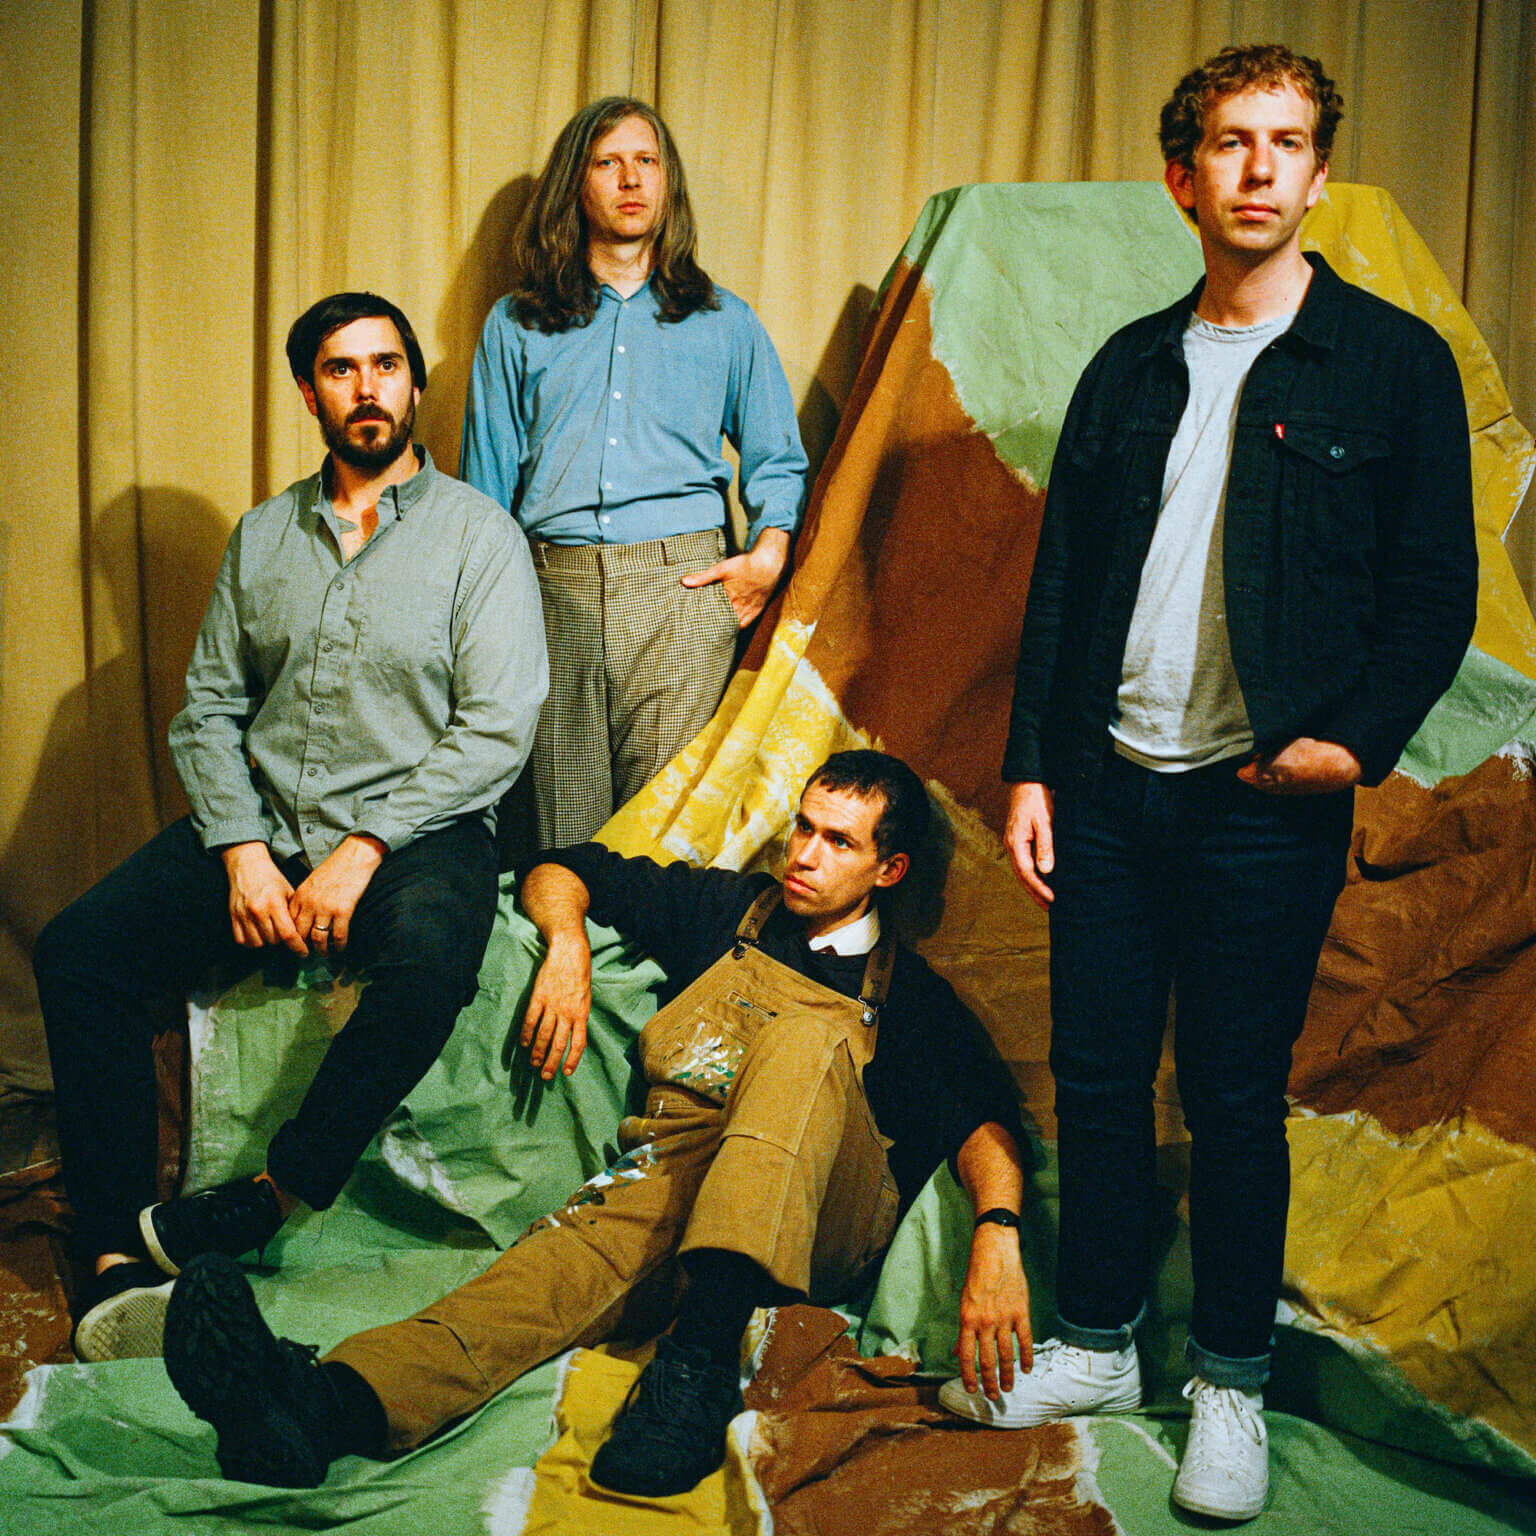 Parquet Courts have announced a new video for “Marathon of Anger,” off their new album, Sympathy For Life, out now on Rough Trade